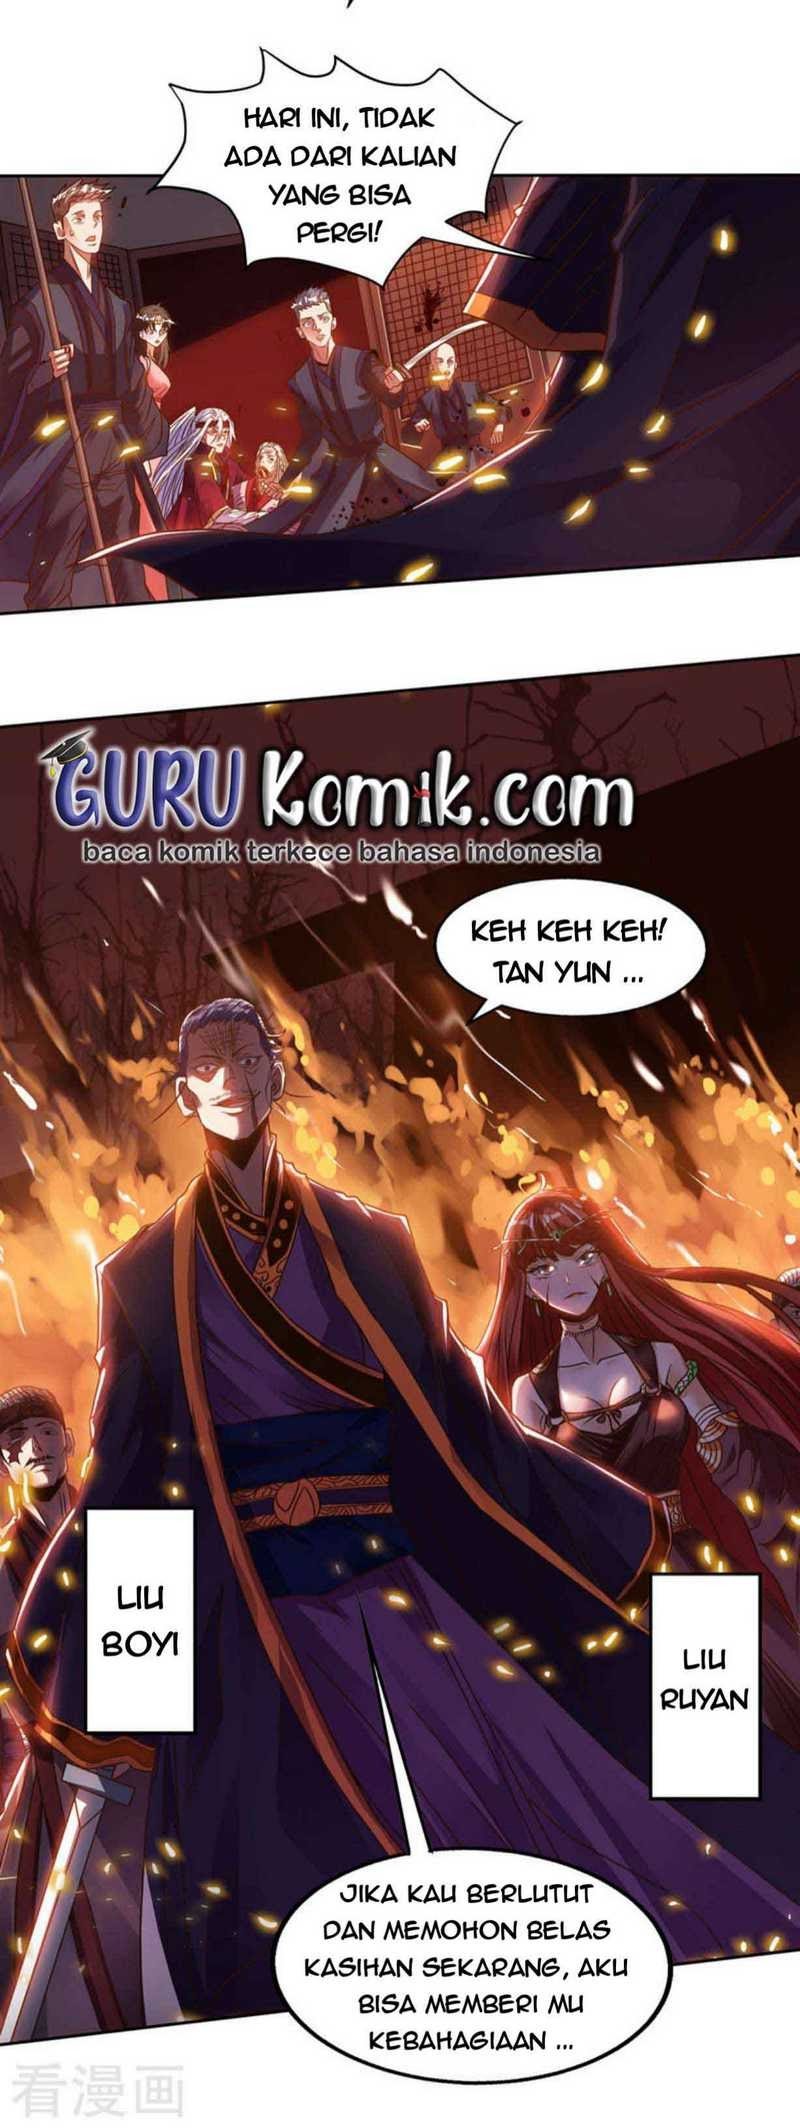 Against The Heaven Supreme (Heaven Guards) Chapter 1 - 177